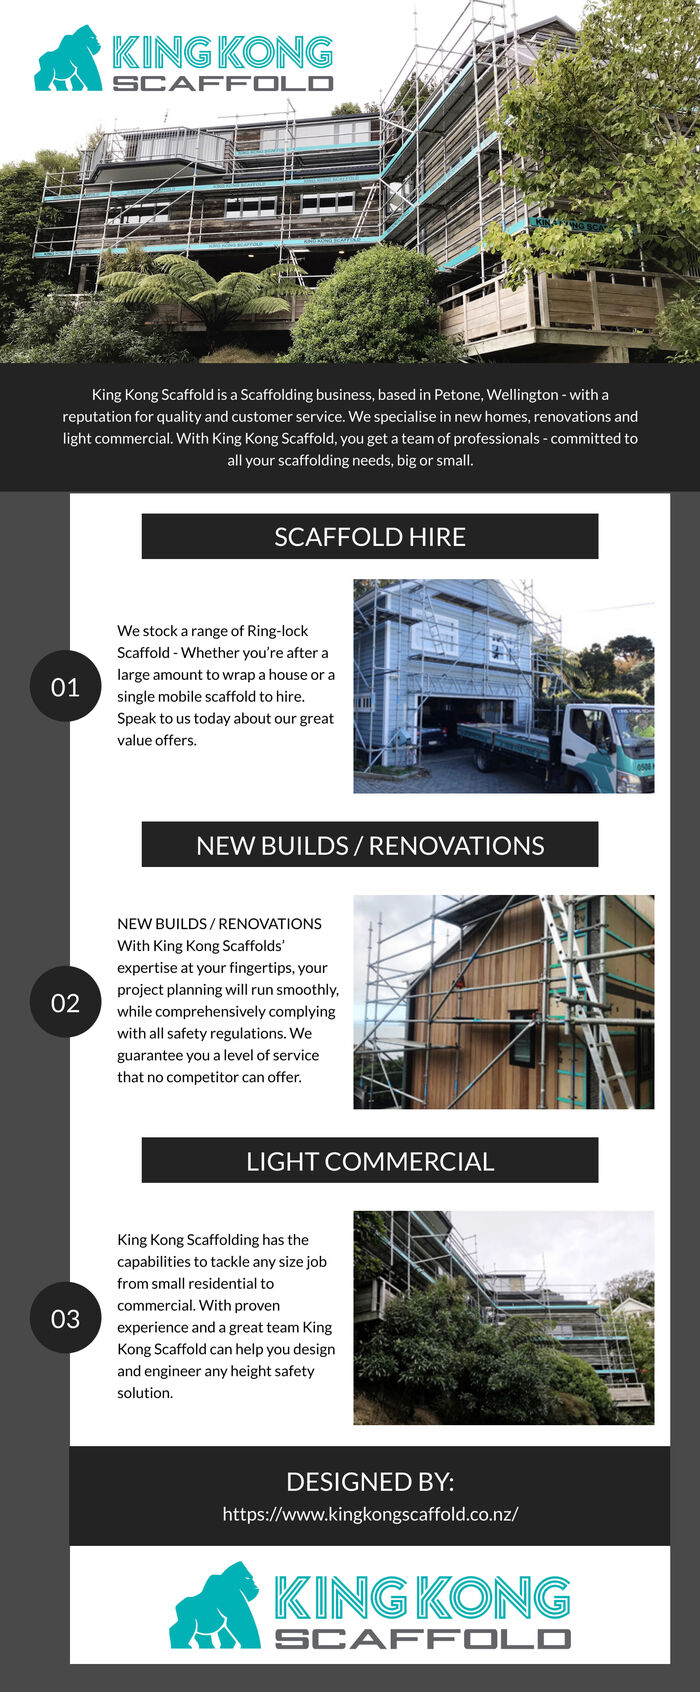 This Infographic is designed by King Kong Scaffold